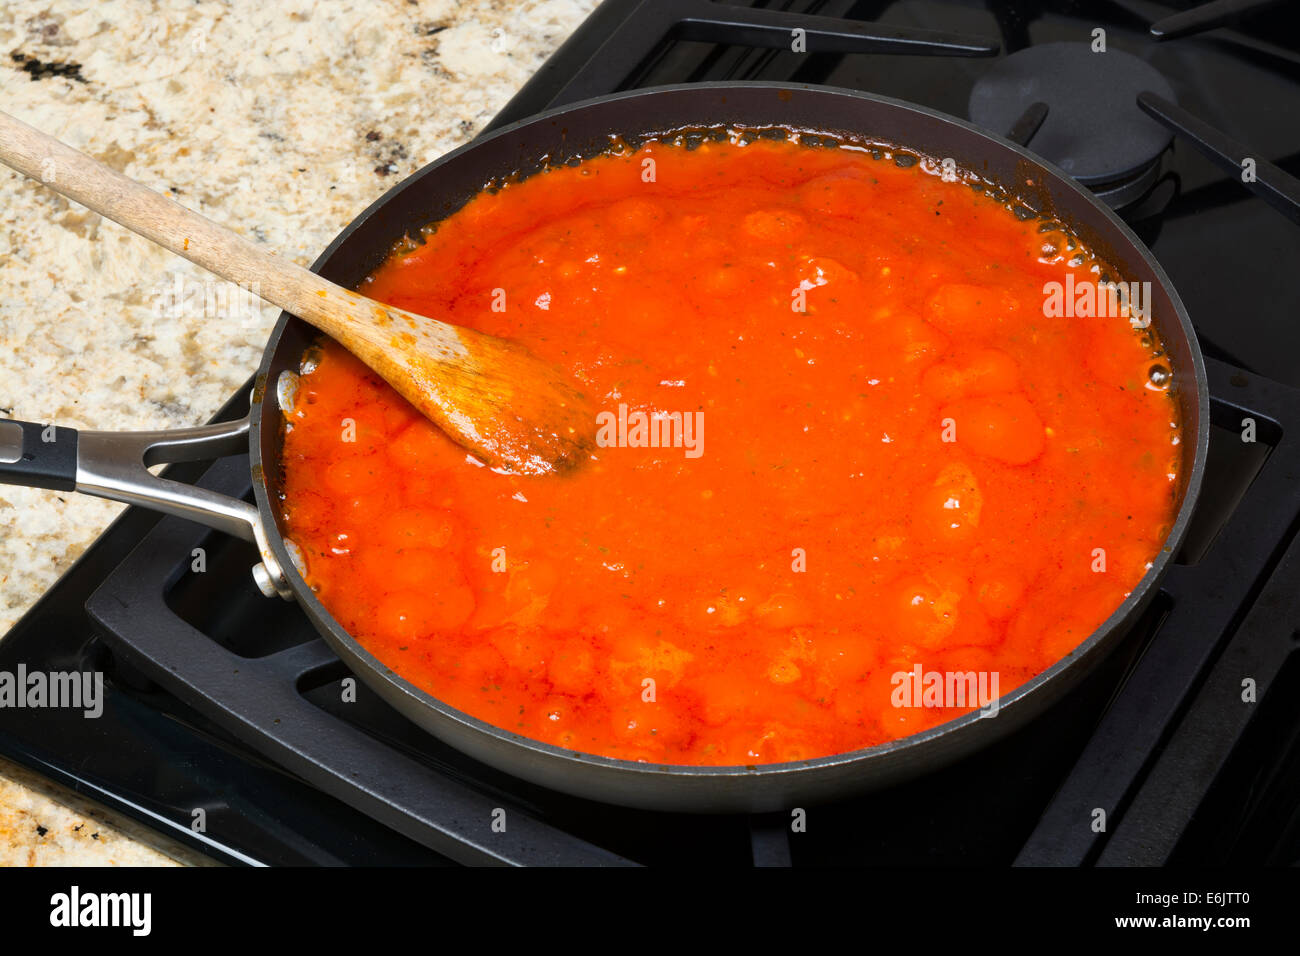 Fresh marinara spaghetti sauce with spices simmering on a gas stove before being added to the pasta. Stock Photo